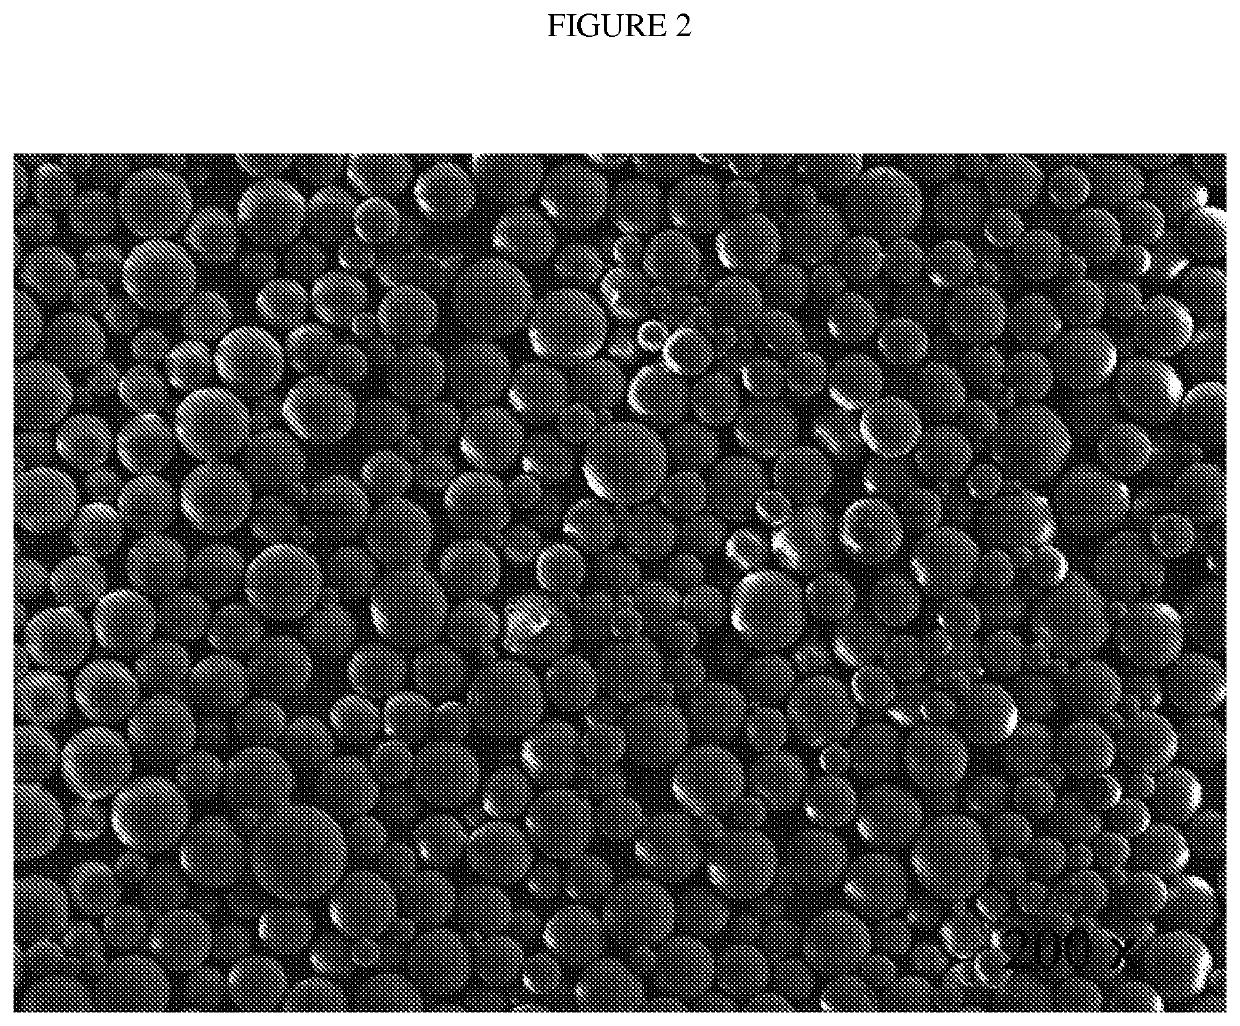 Microencapsulation of chemical additives